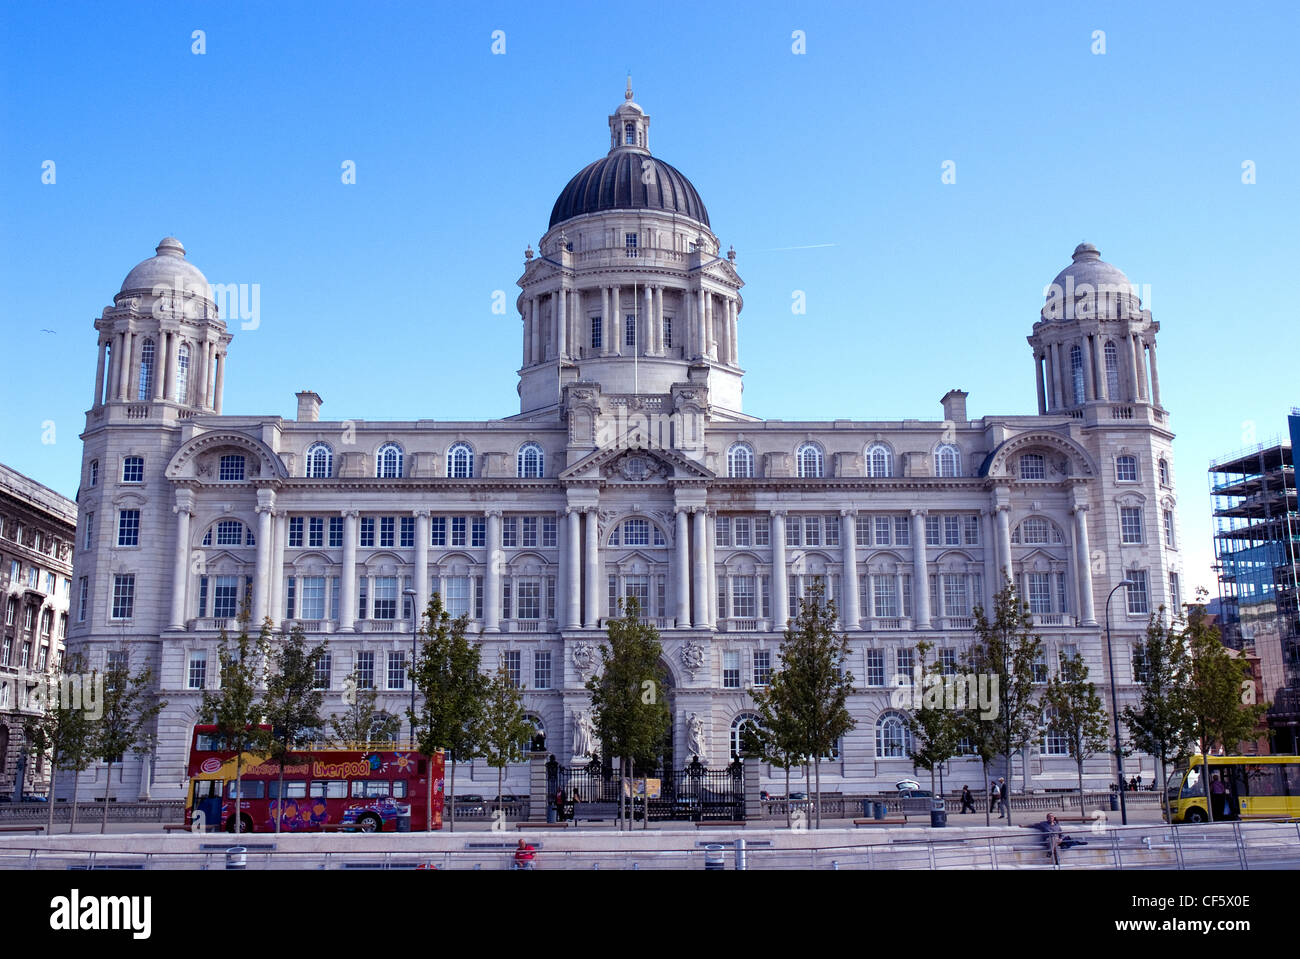 The Port of Liverpool building at the Pier Head, one of Liverpool's 'Three Graces'. Stock Photo